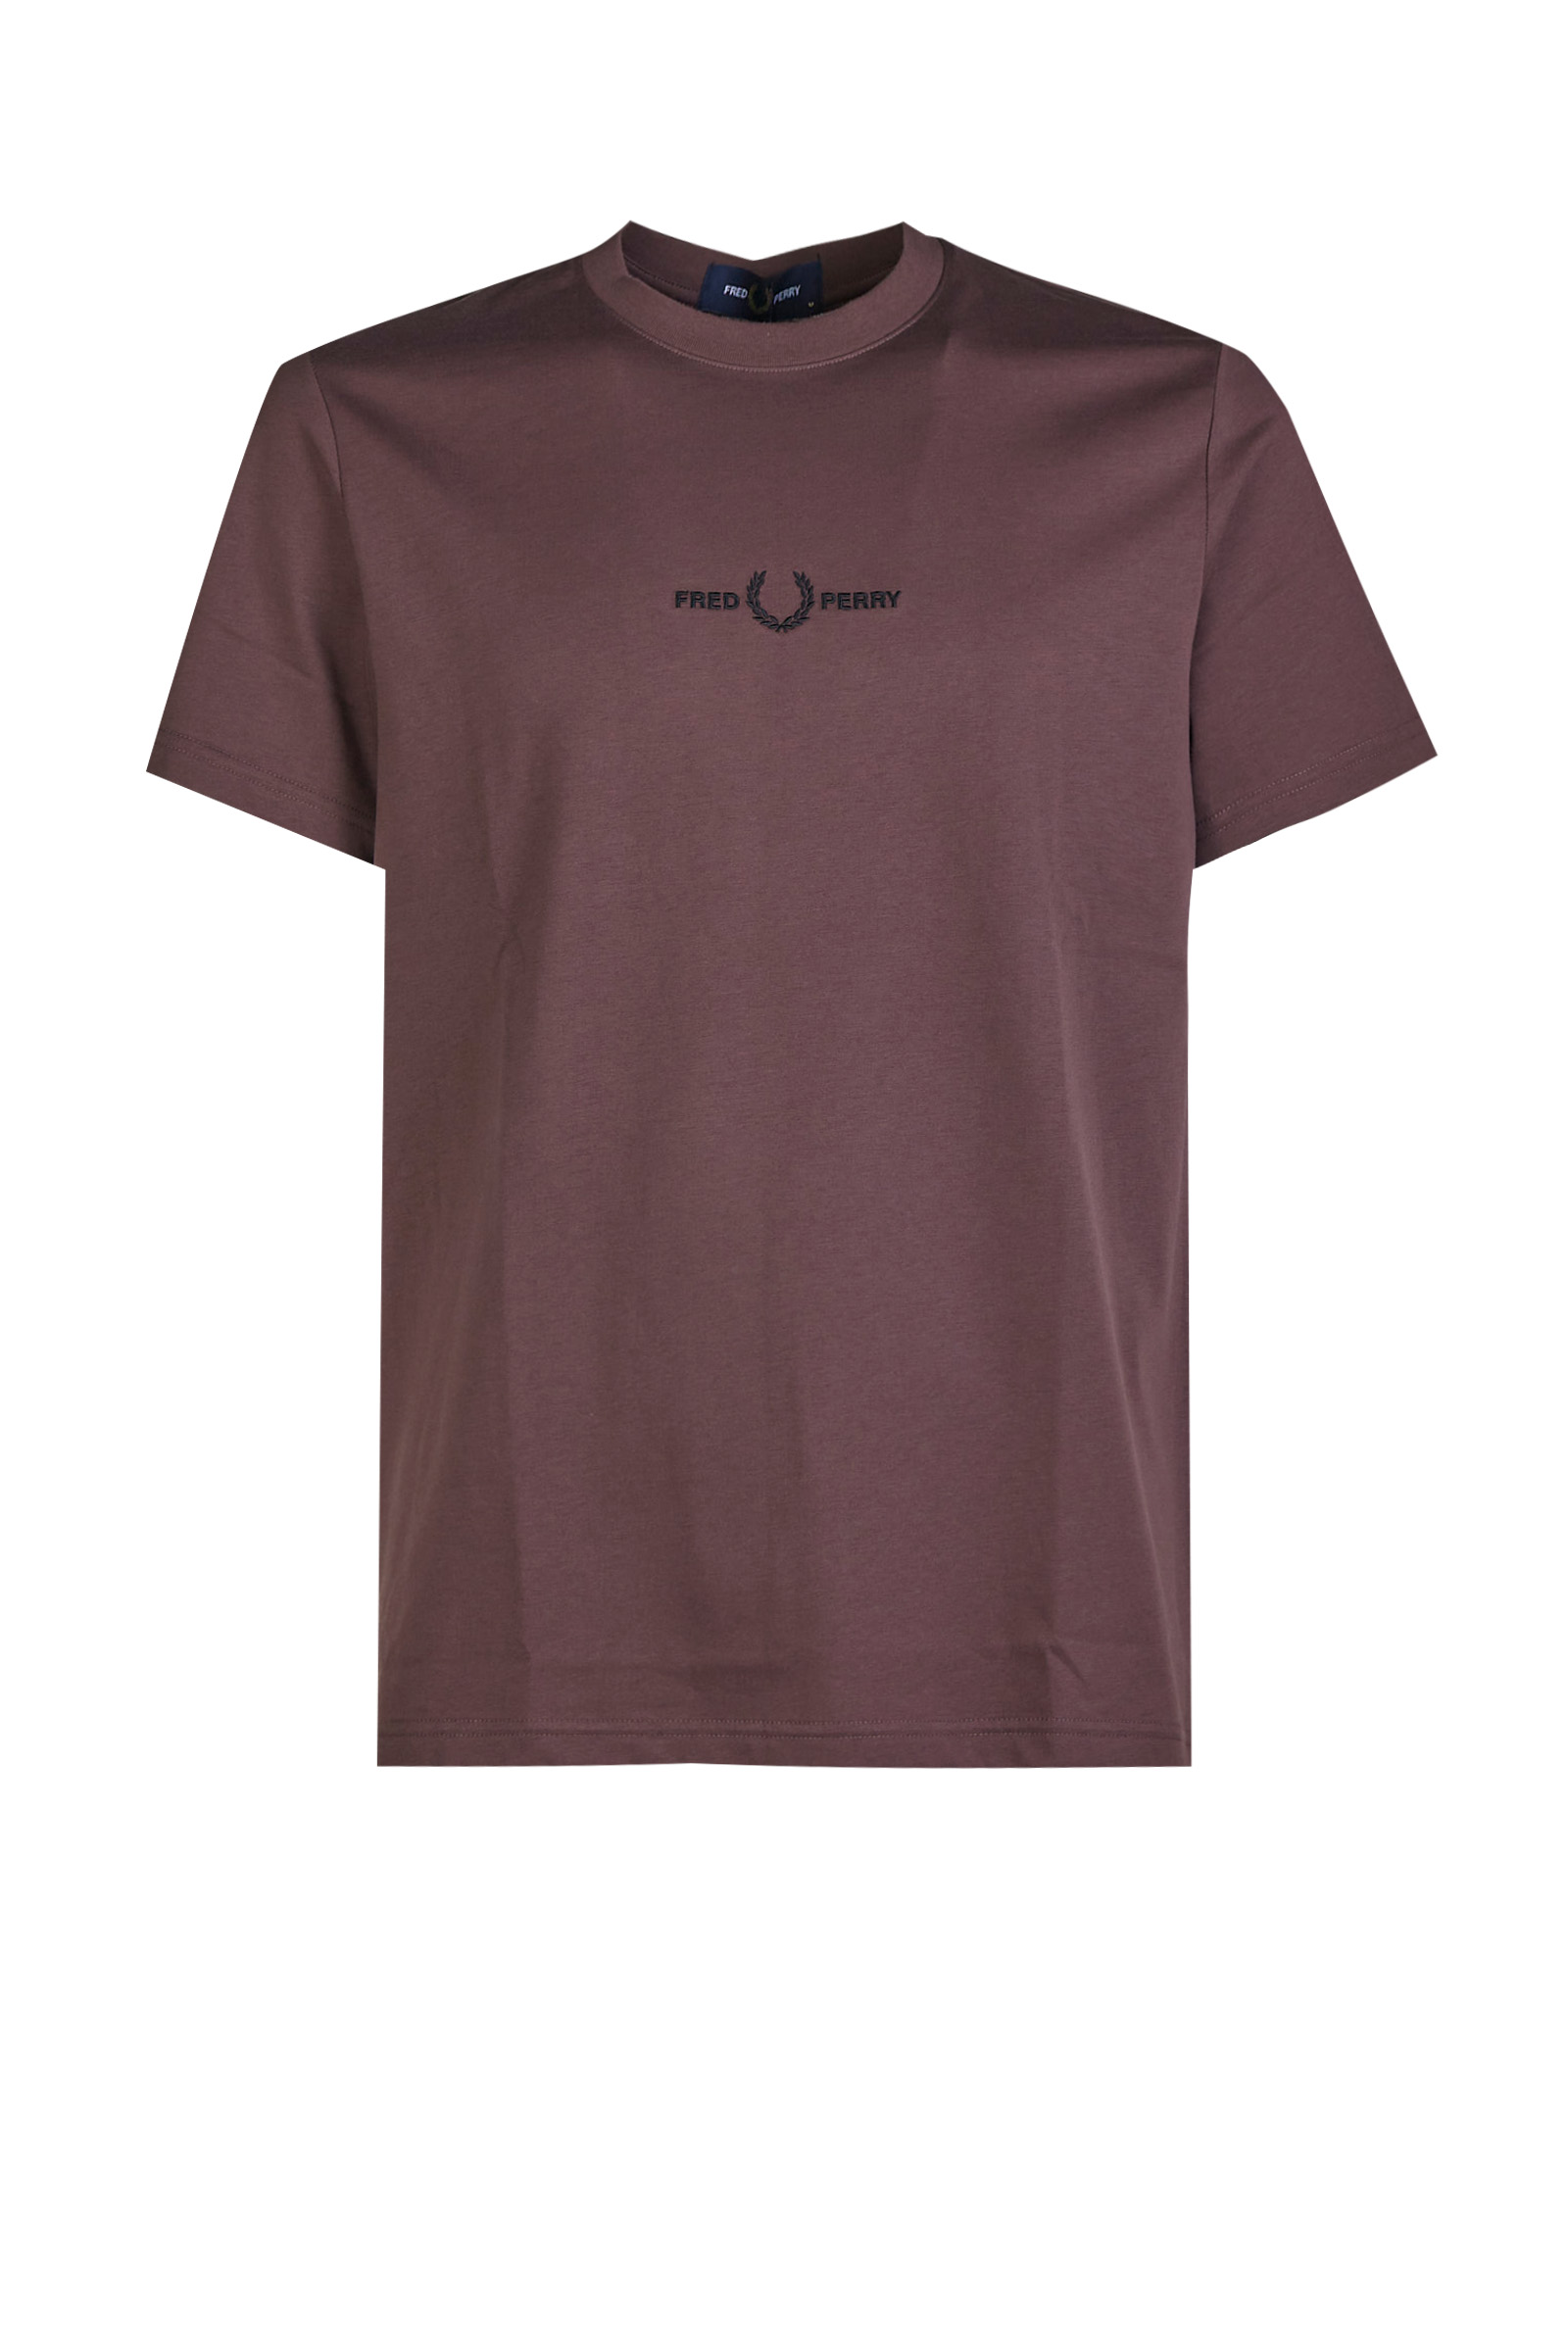 FRED PERRY T-SHIRT T-EMBROIDERED M4580 U53 WOOD UOMO